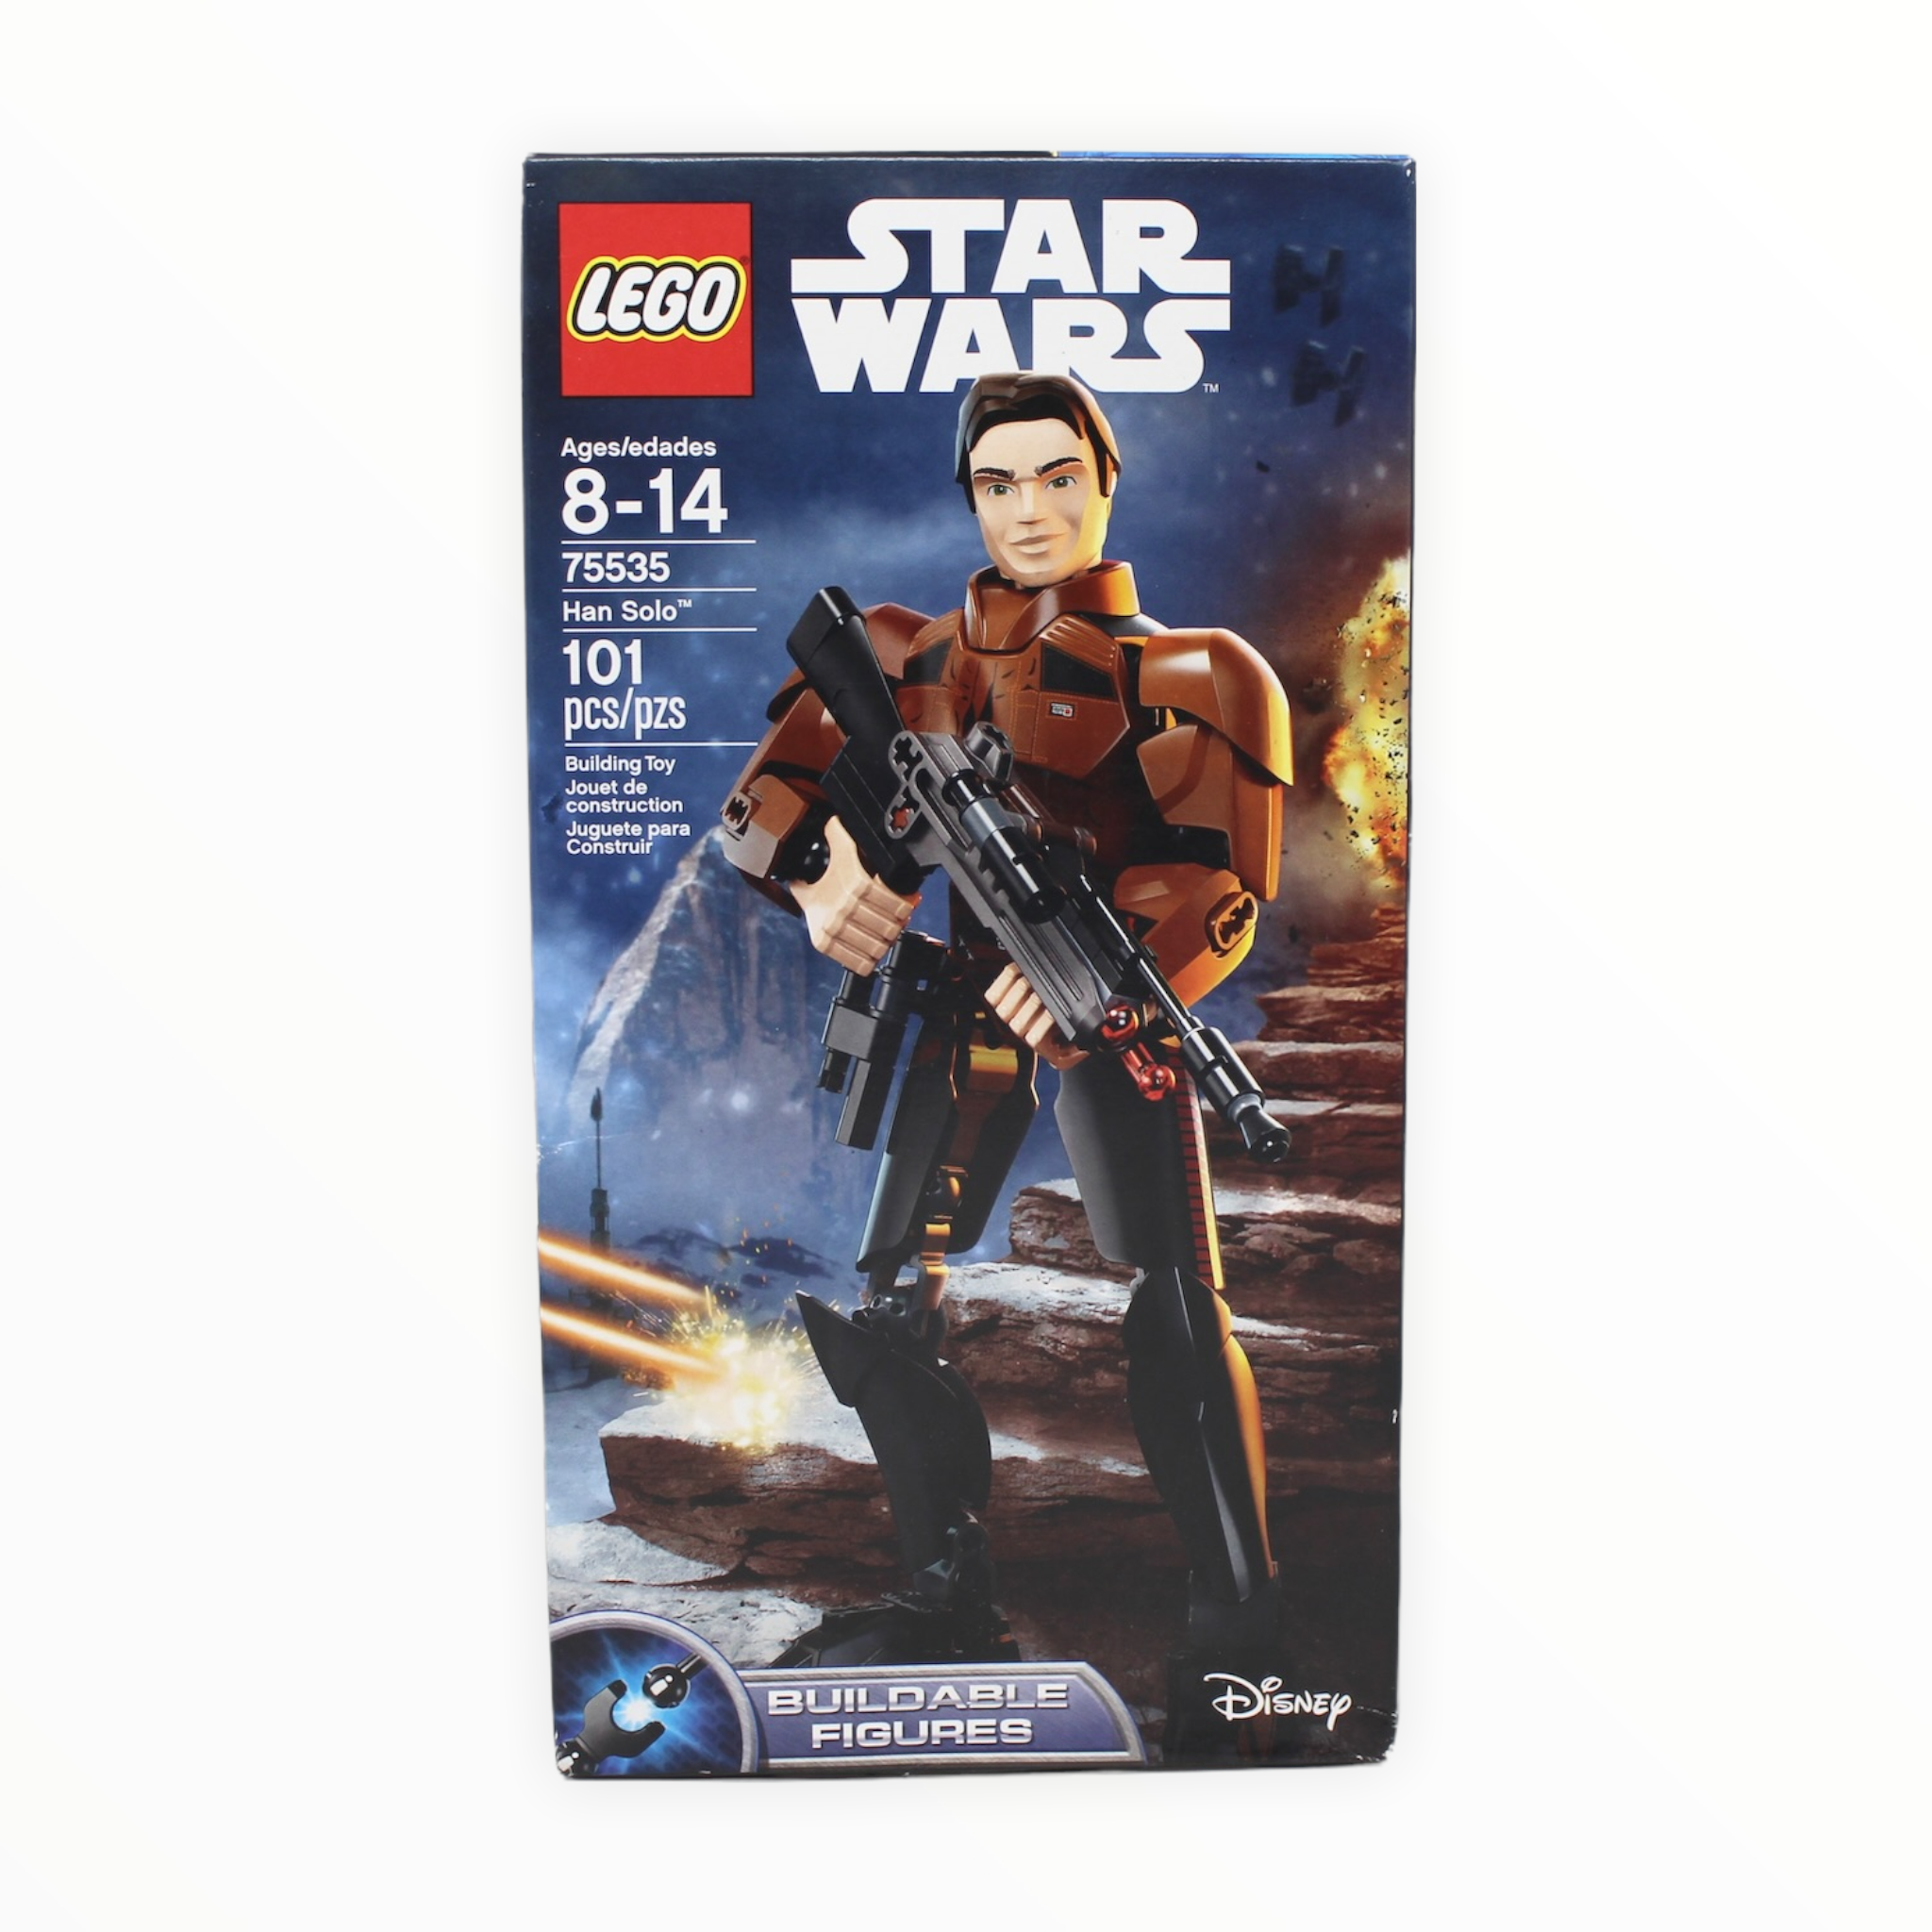 Retired Set 75535 Star Wars Buildable Figures Han Solo